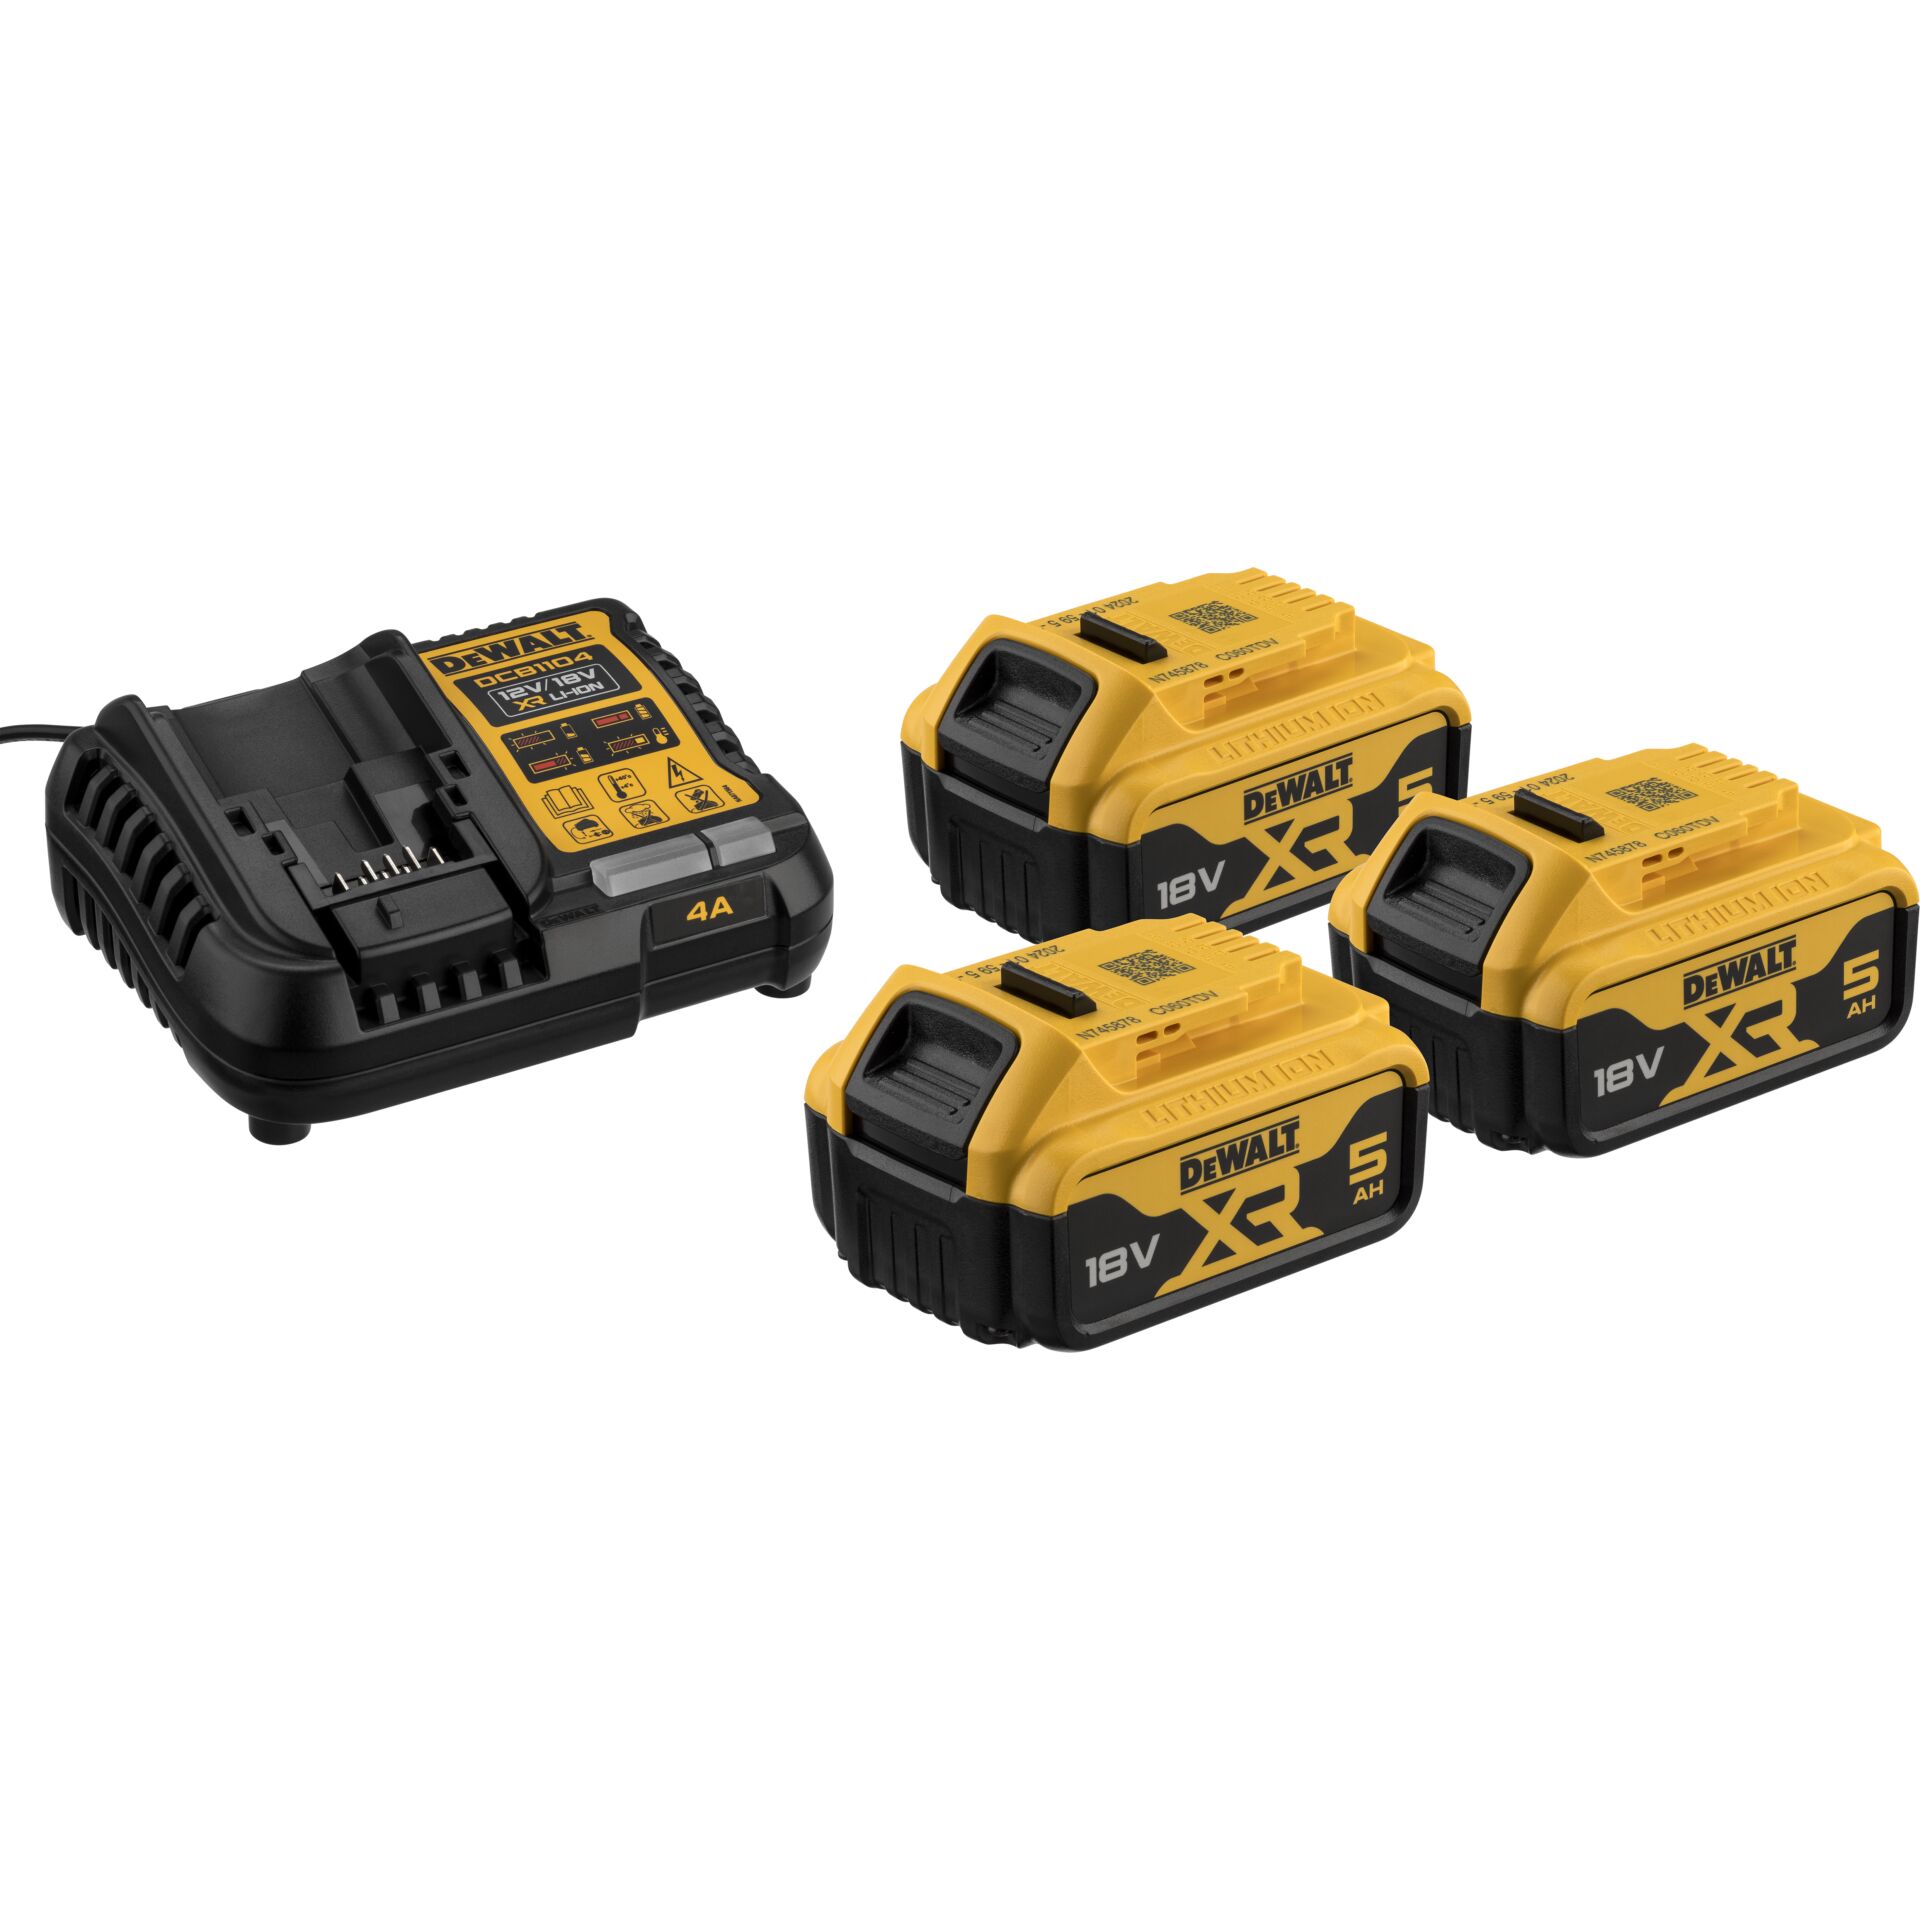 DeWALT DCB1104P3-QW cordless tool battery / charger Battery & charger set